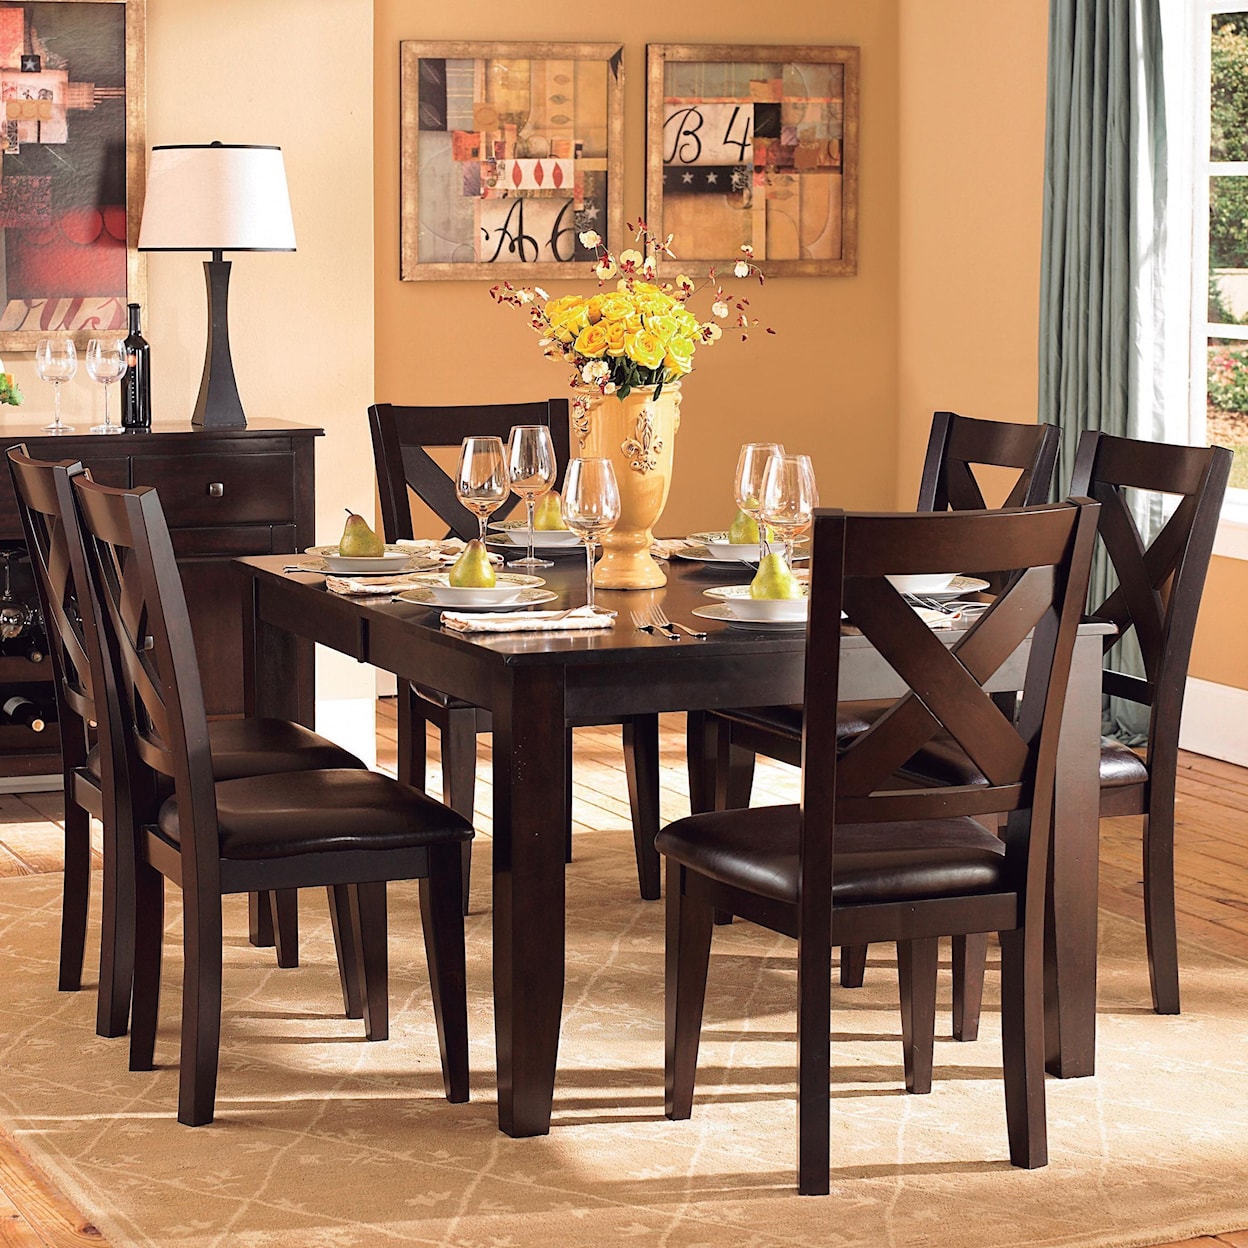 Homelegance Crown Point Formal Dining Table and Chair Set